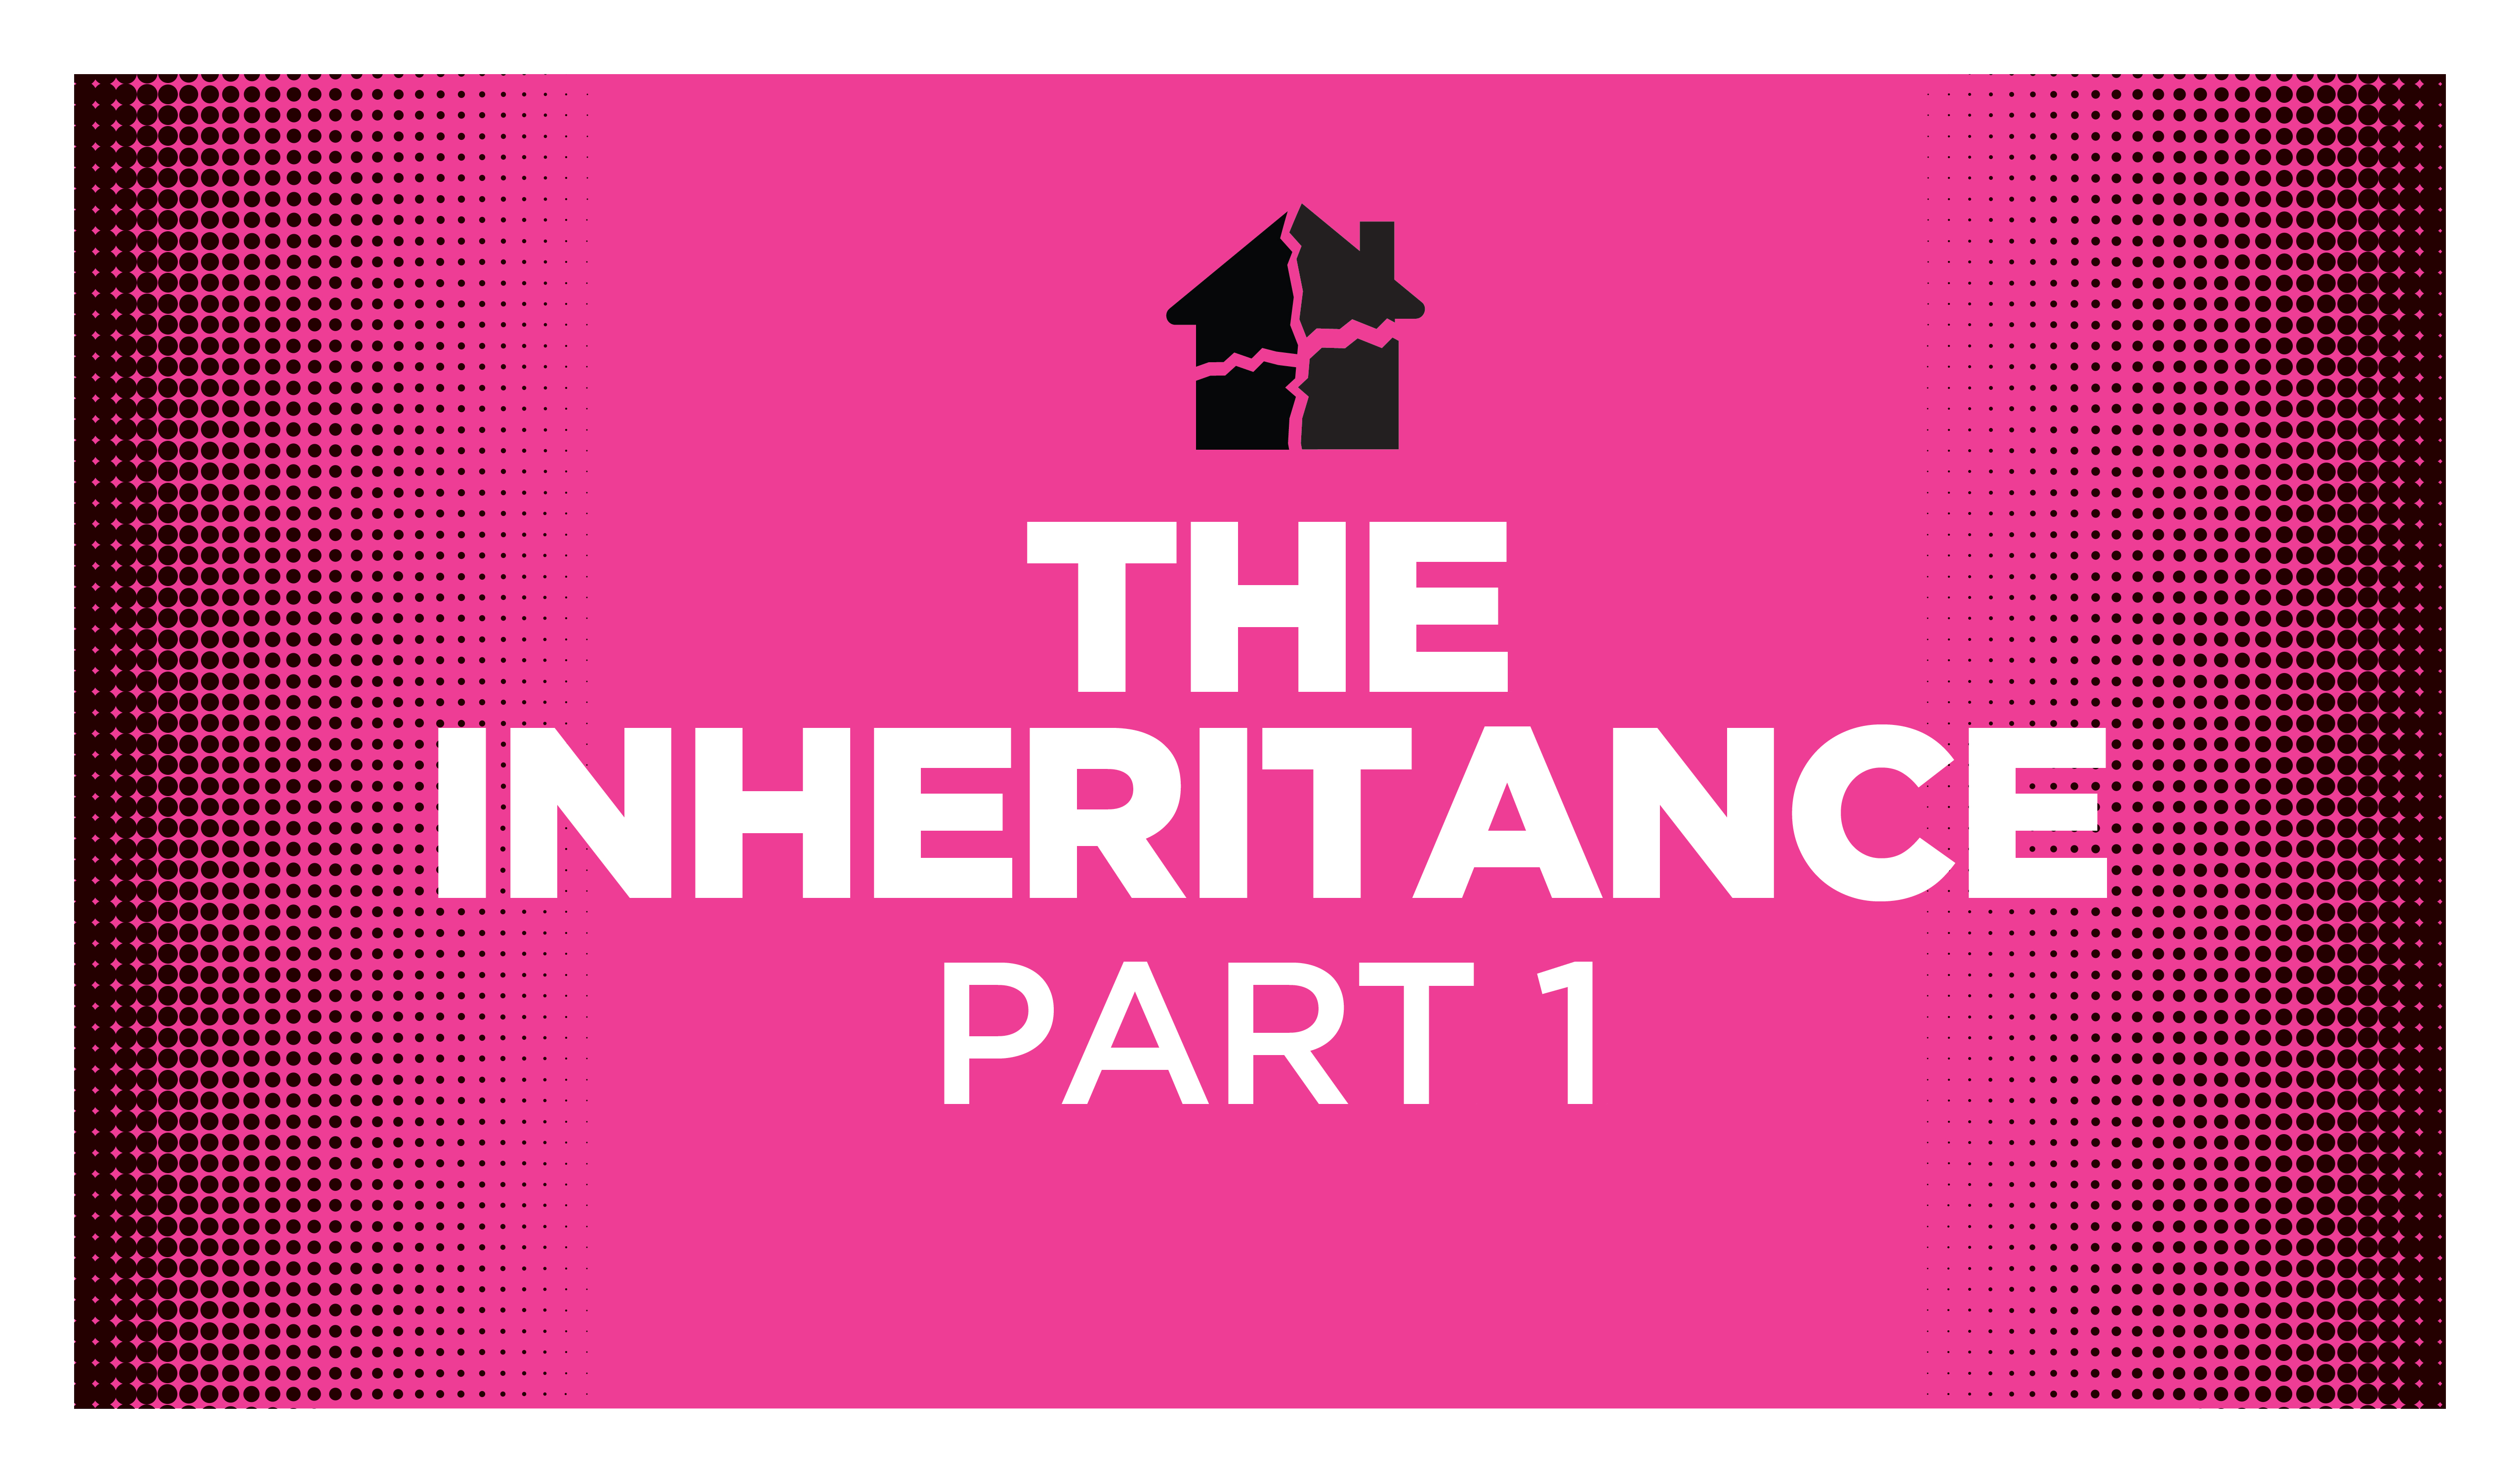 Video Auditions for THE INHERITANCE, by Zach Theatre - Submission Deadline Friday, April 1, 2022